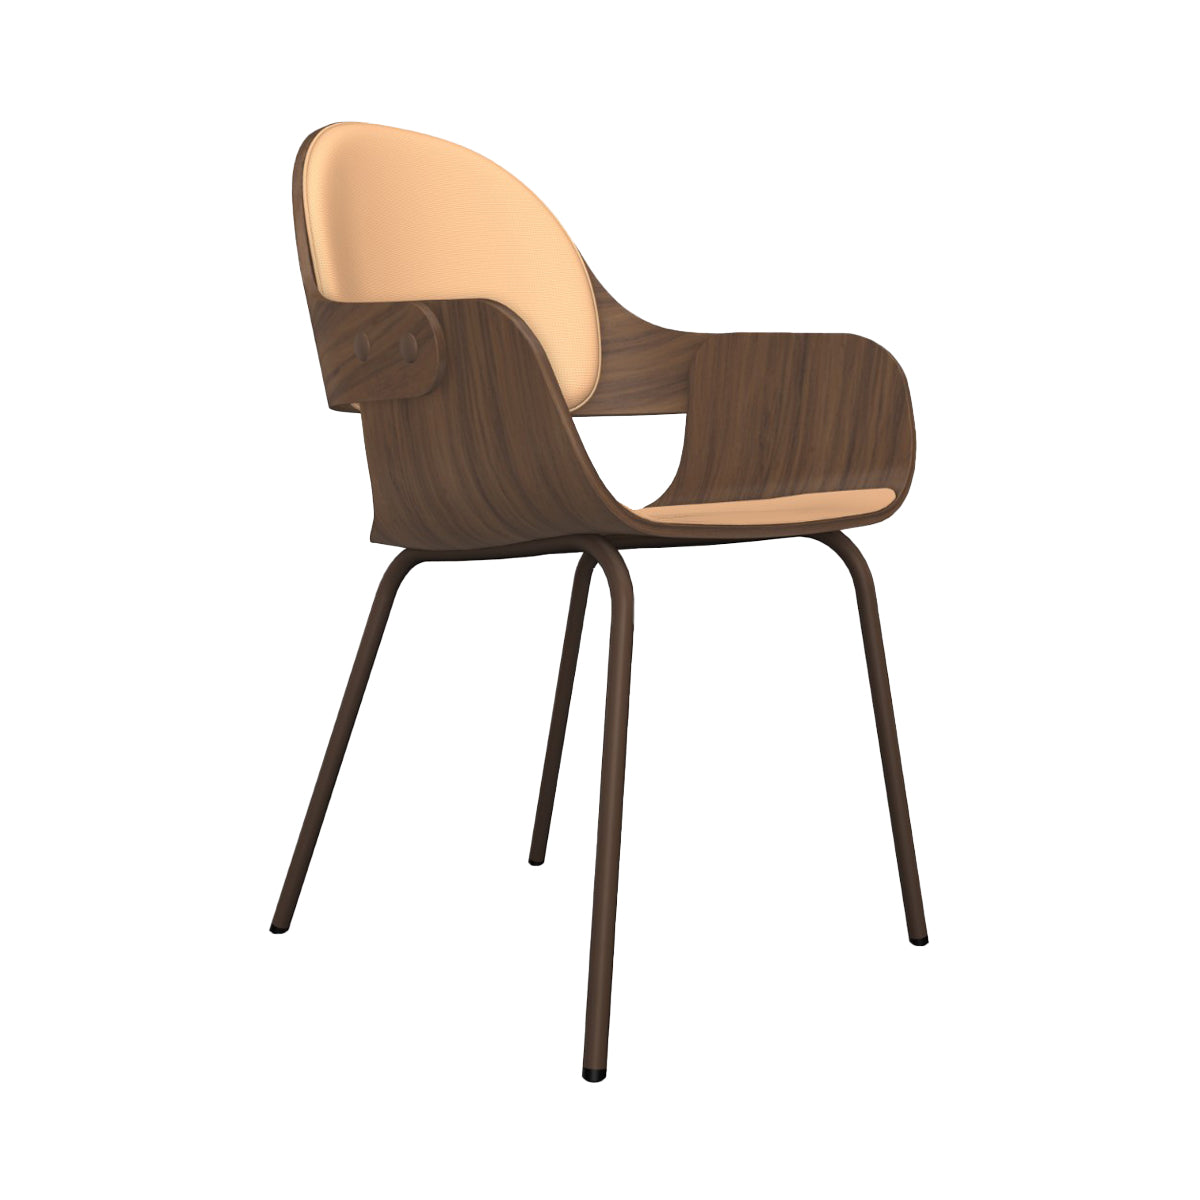 Showtime Nude Chair with Metal Base: Seat + Backrest Cushion + Walnut + Pale Brown